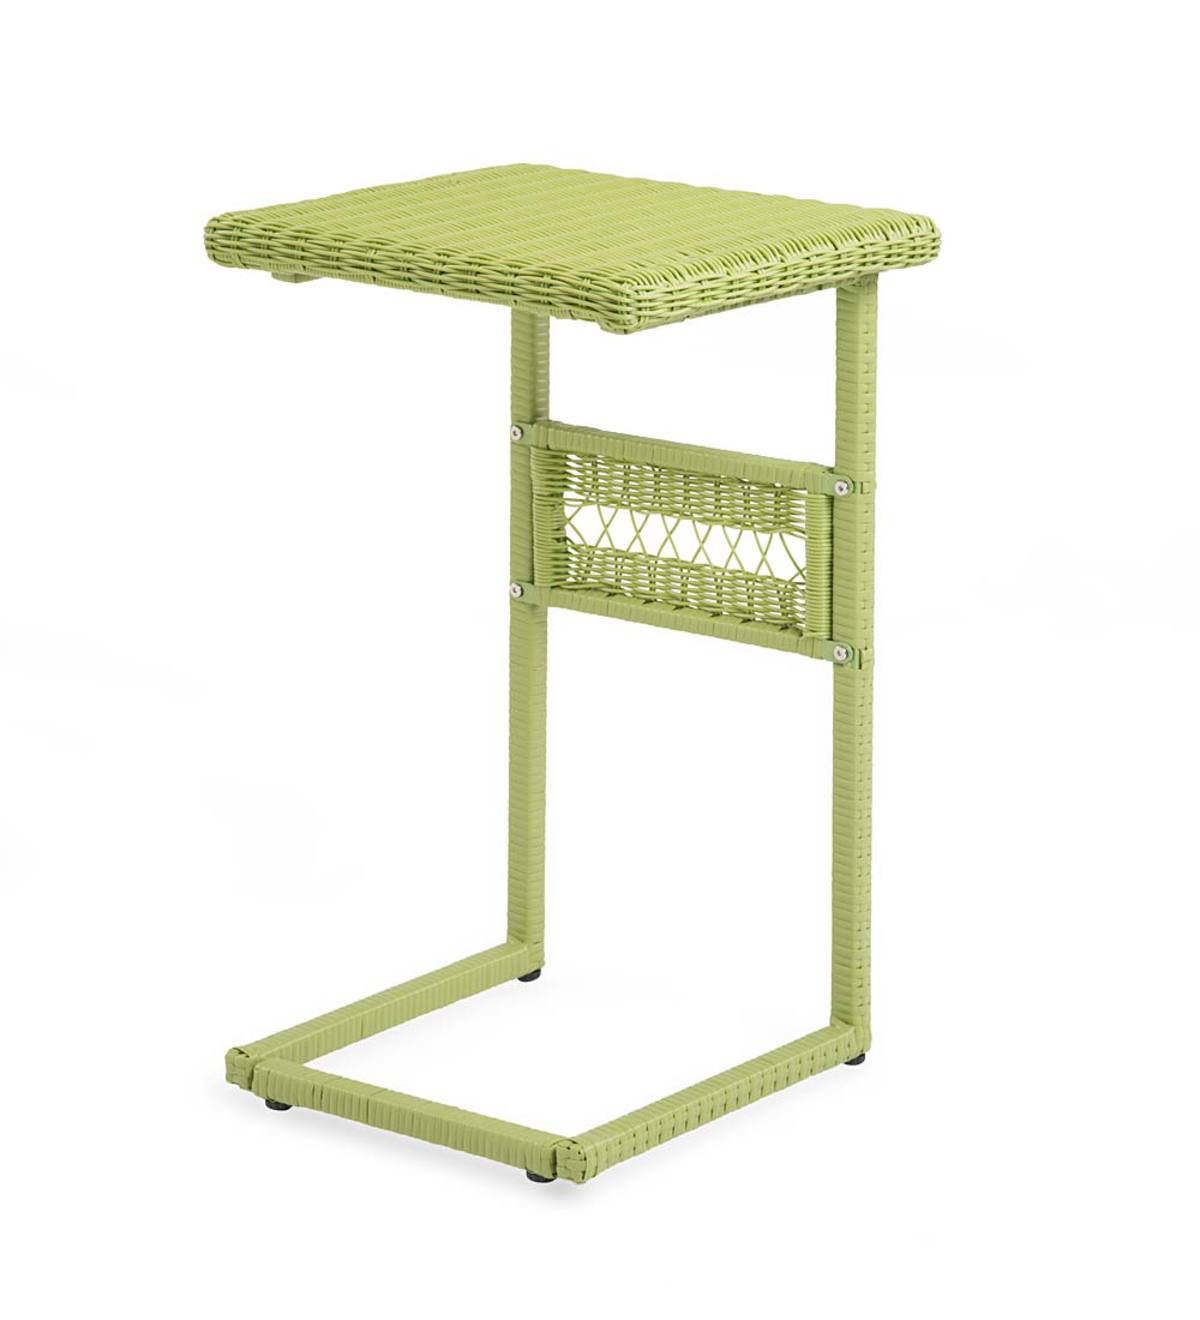 Easy Care Resin Wicker Pull Up Table - Lime